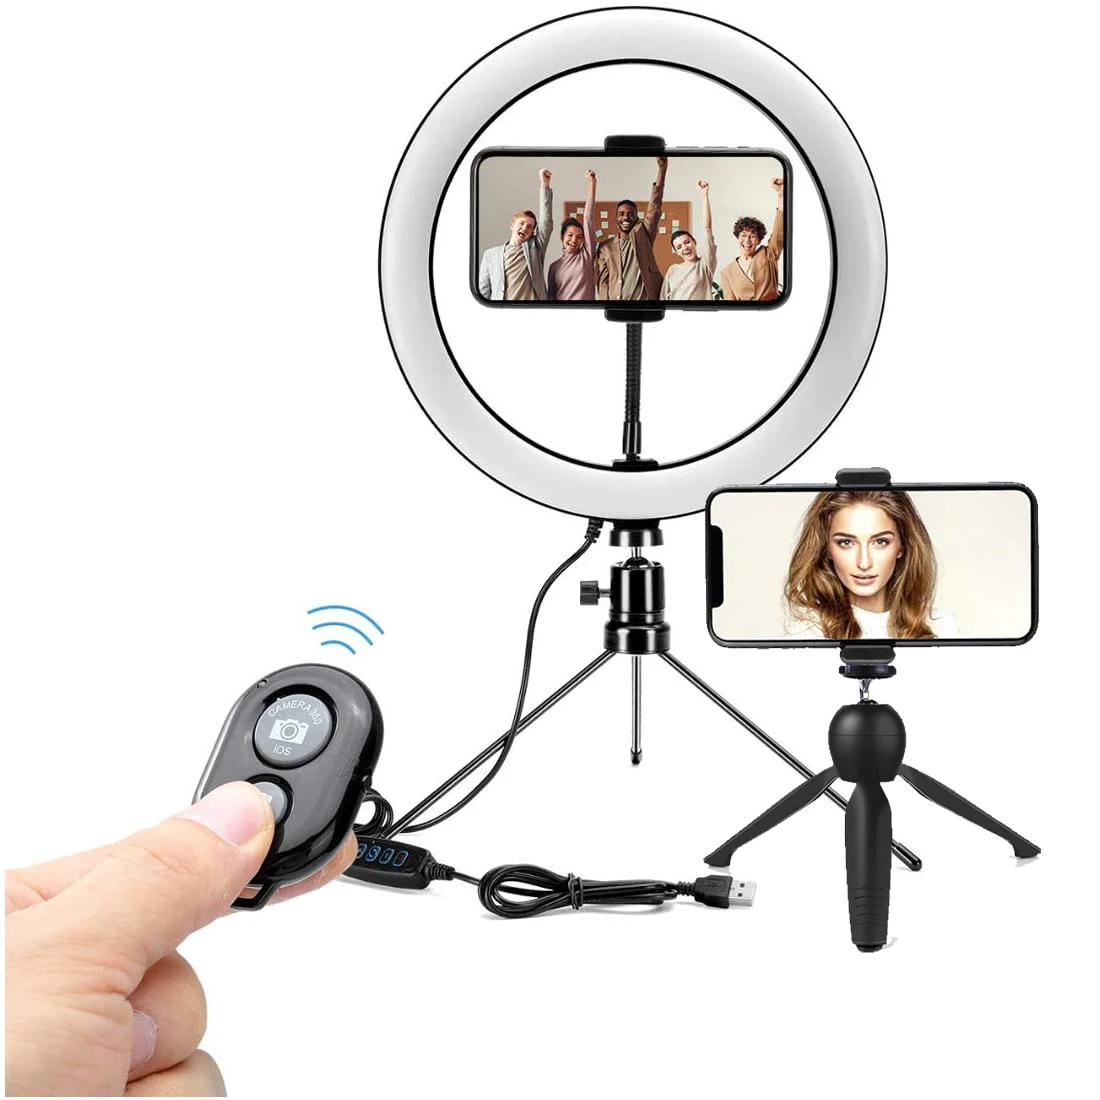 

10" Fill Ringlight Selfie Circle Light Photography Makeup Live YouTube LED Dimmable Ring Lamp Tripod Stand Phone Holder